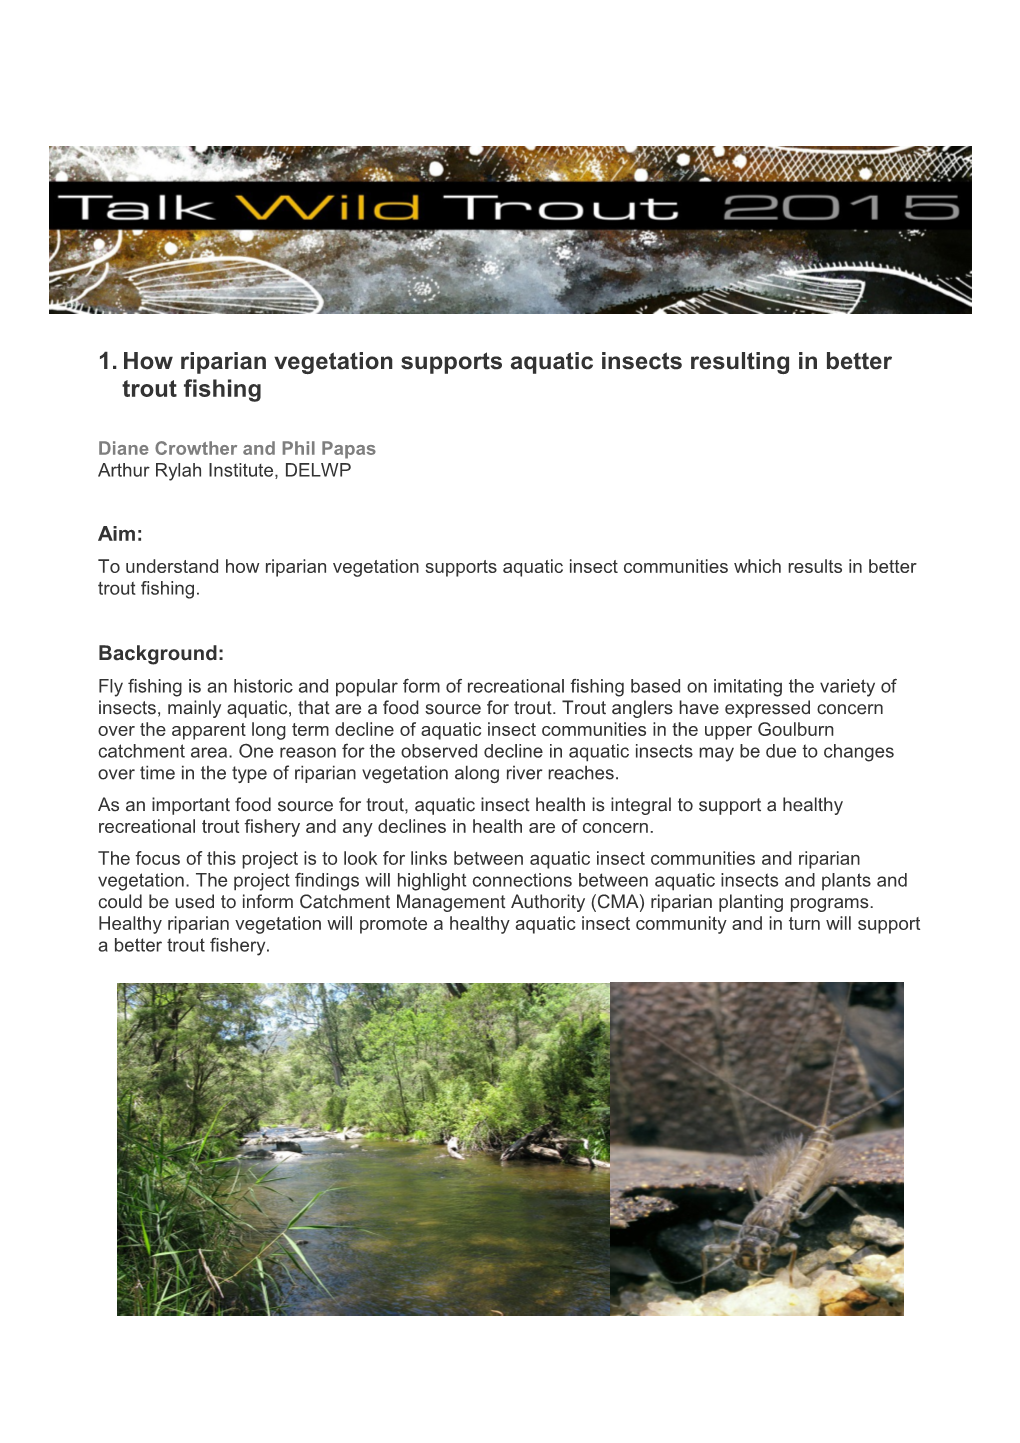 How Riparian Vegetation Supports Aquatic Insectsresulting in Better Trout Fishing